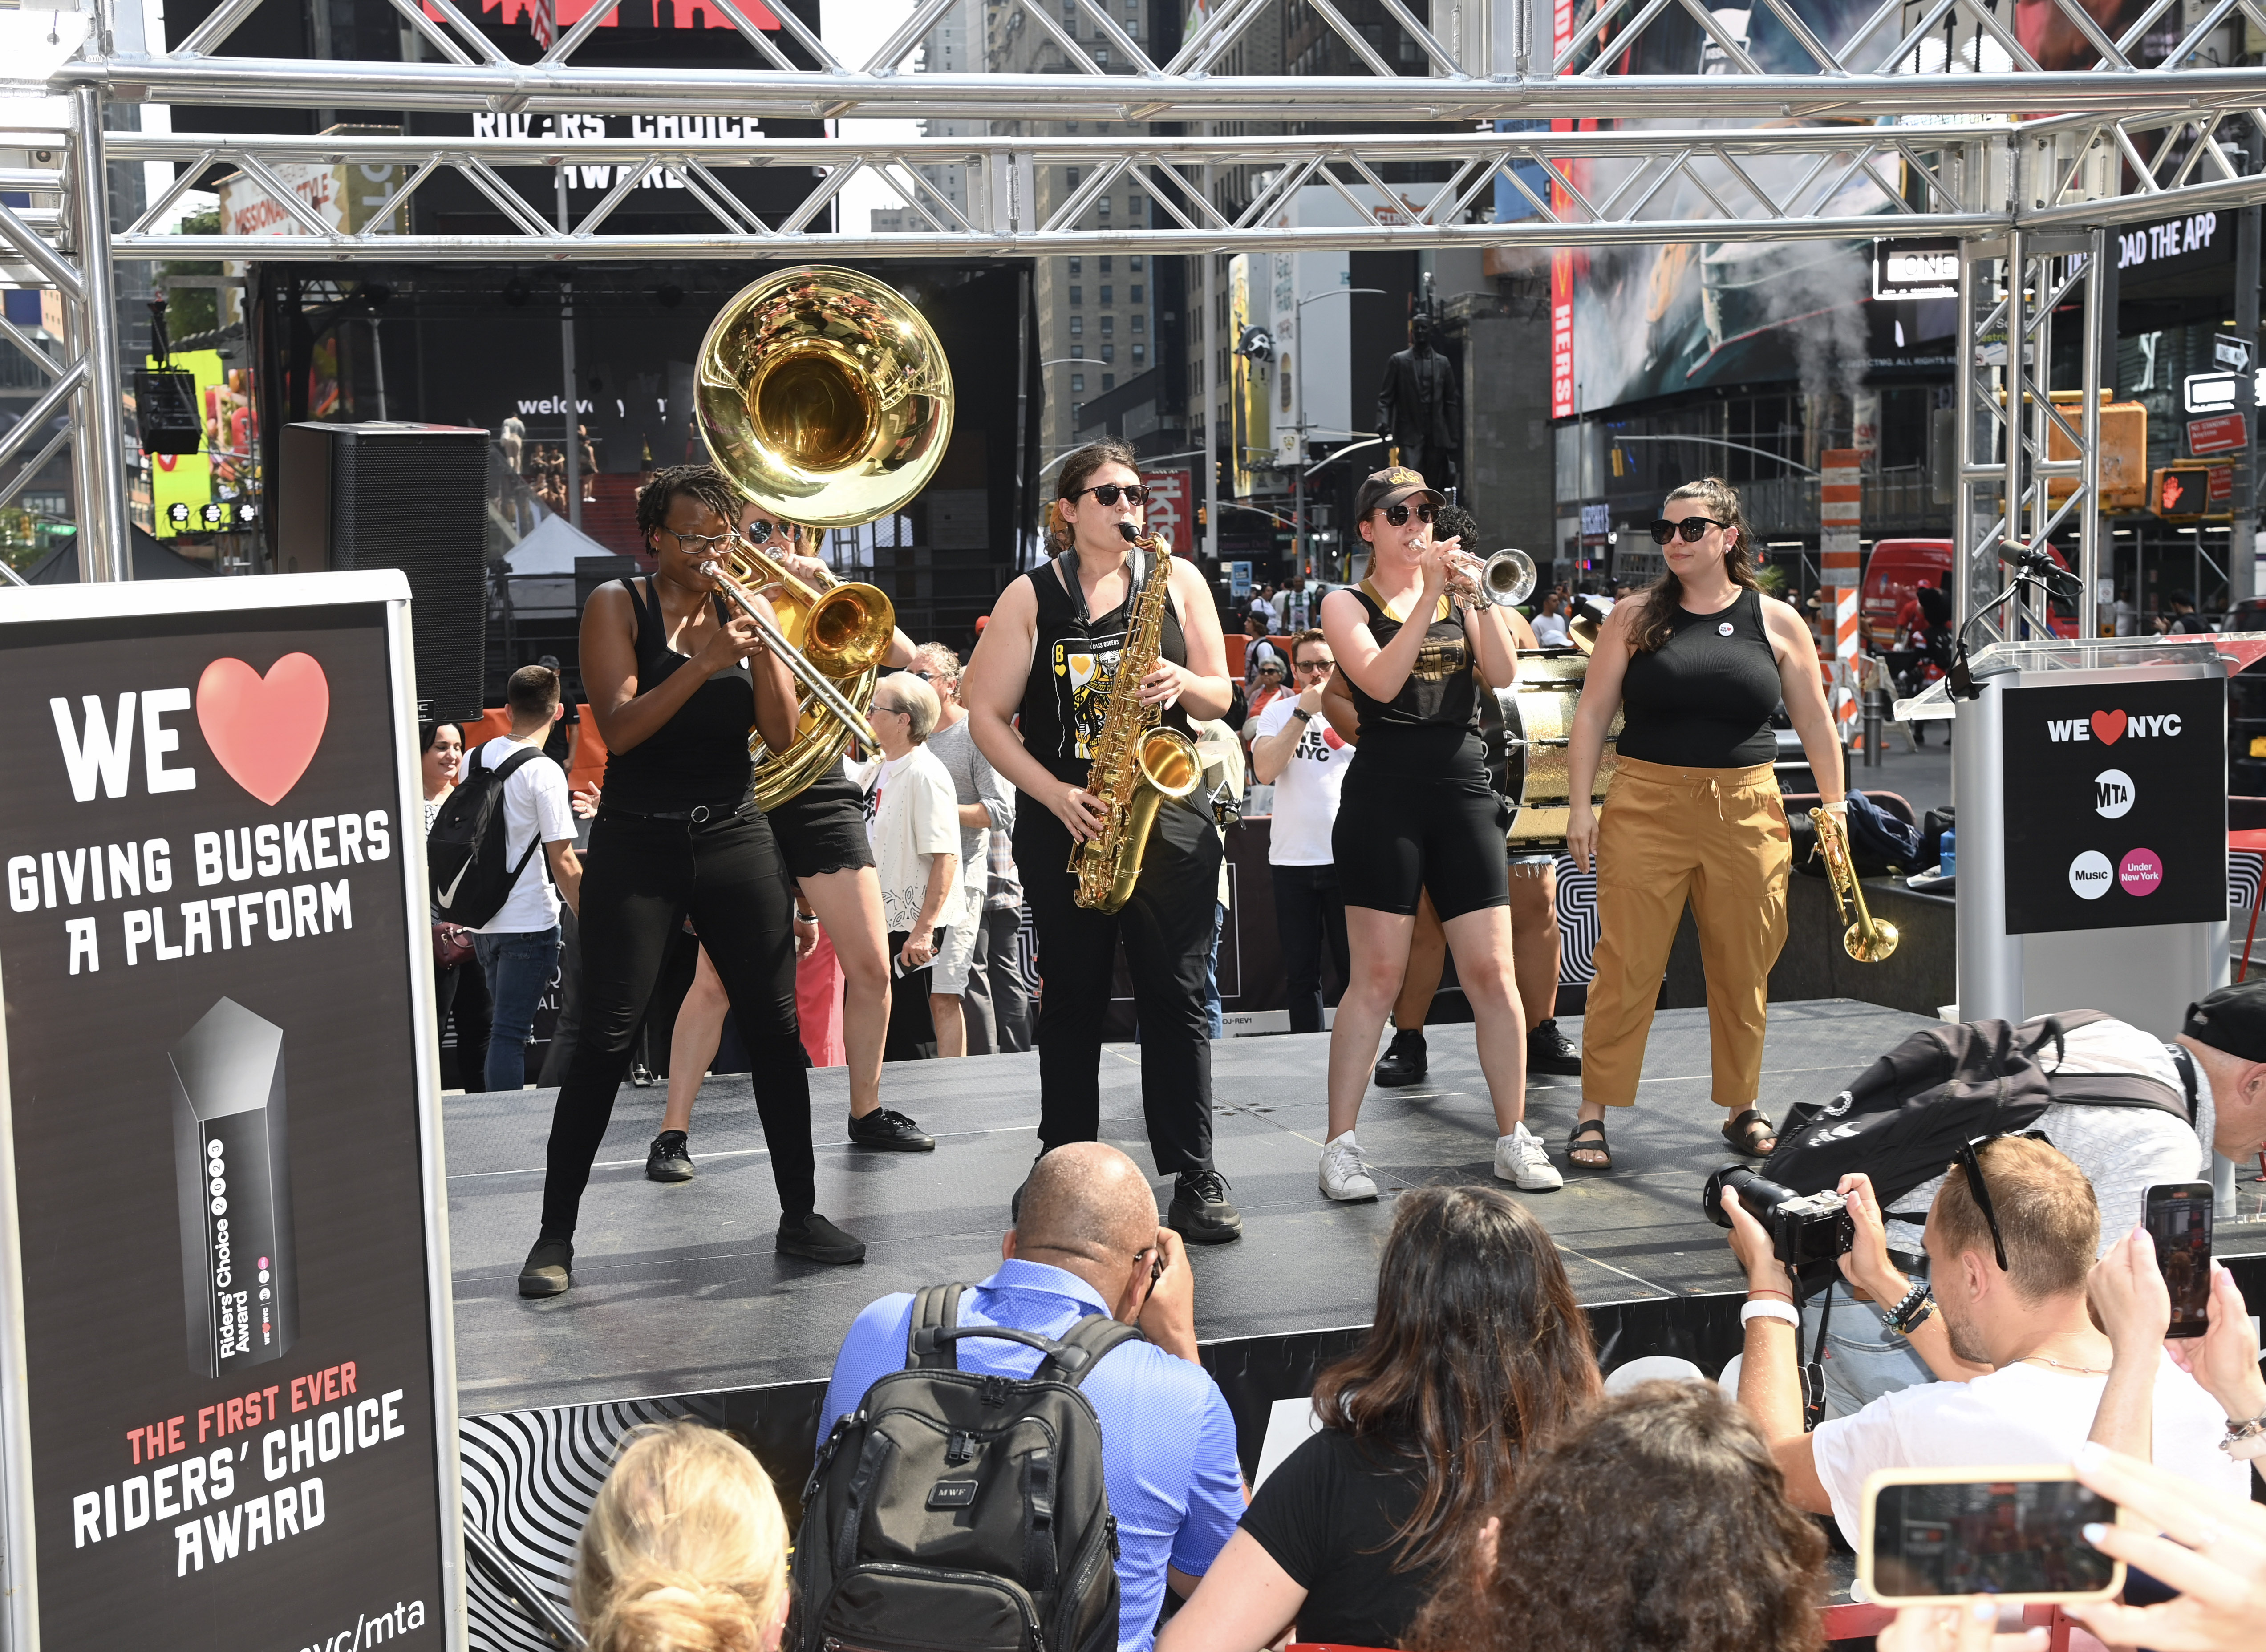 A group of women performing on a stage with brass instruments.